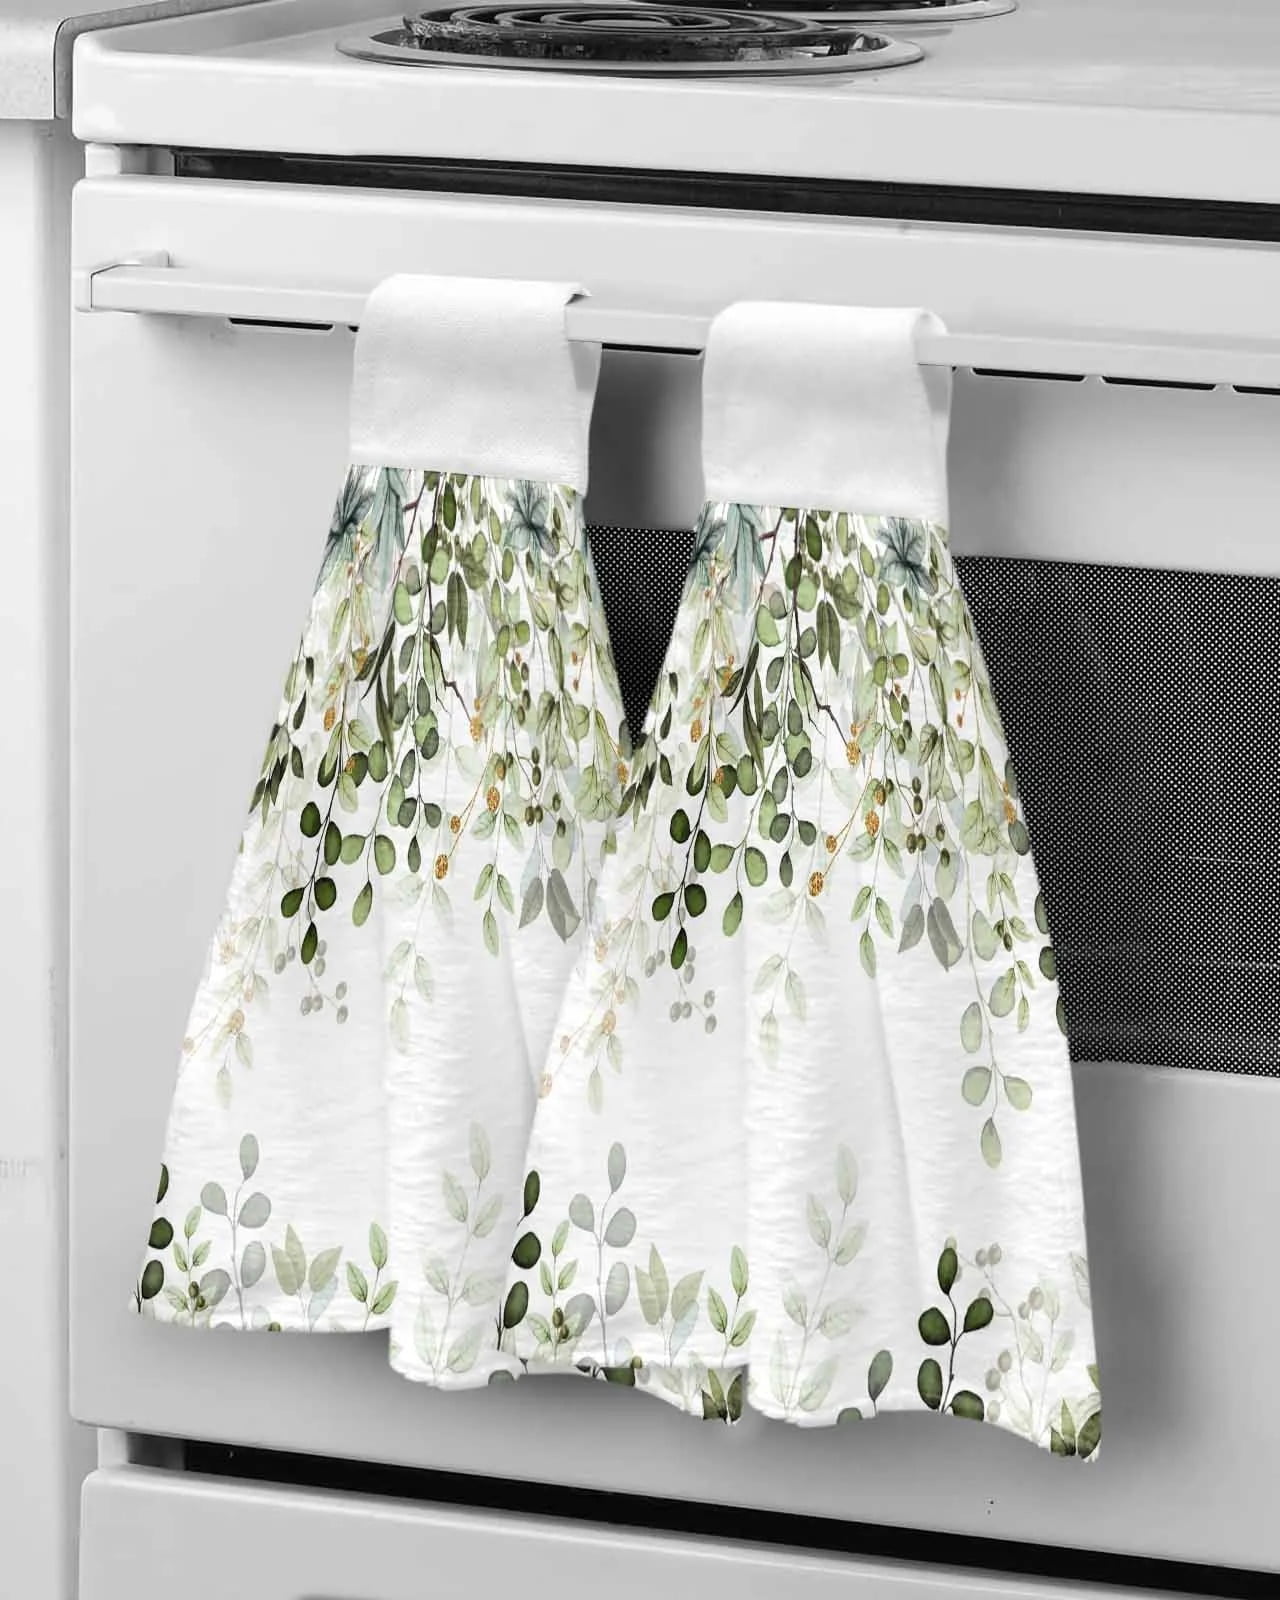 Abstract Sage Green Leaves Branches Hand Towels Kitchen Bathroom ...